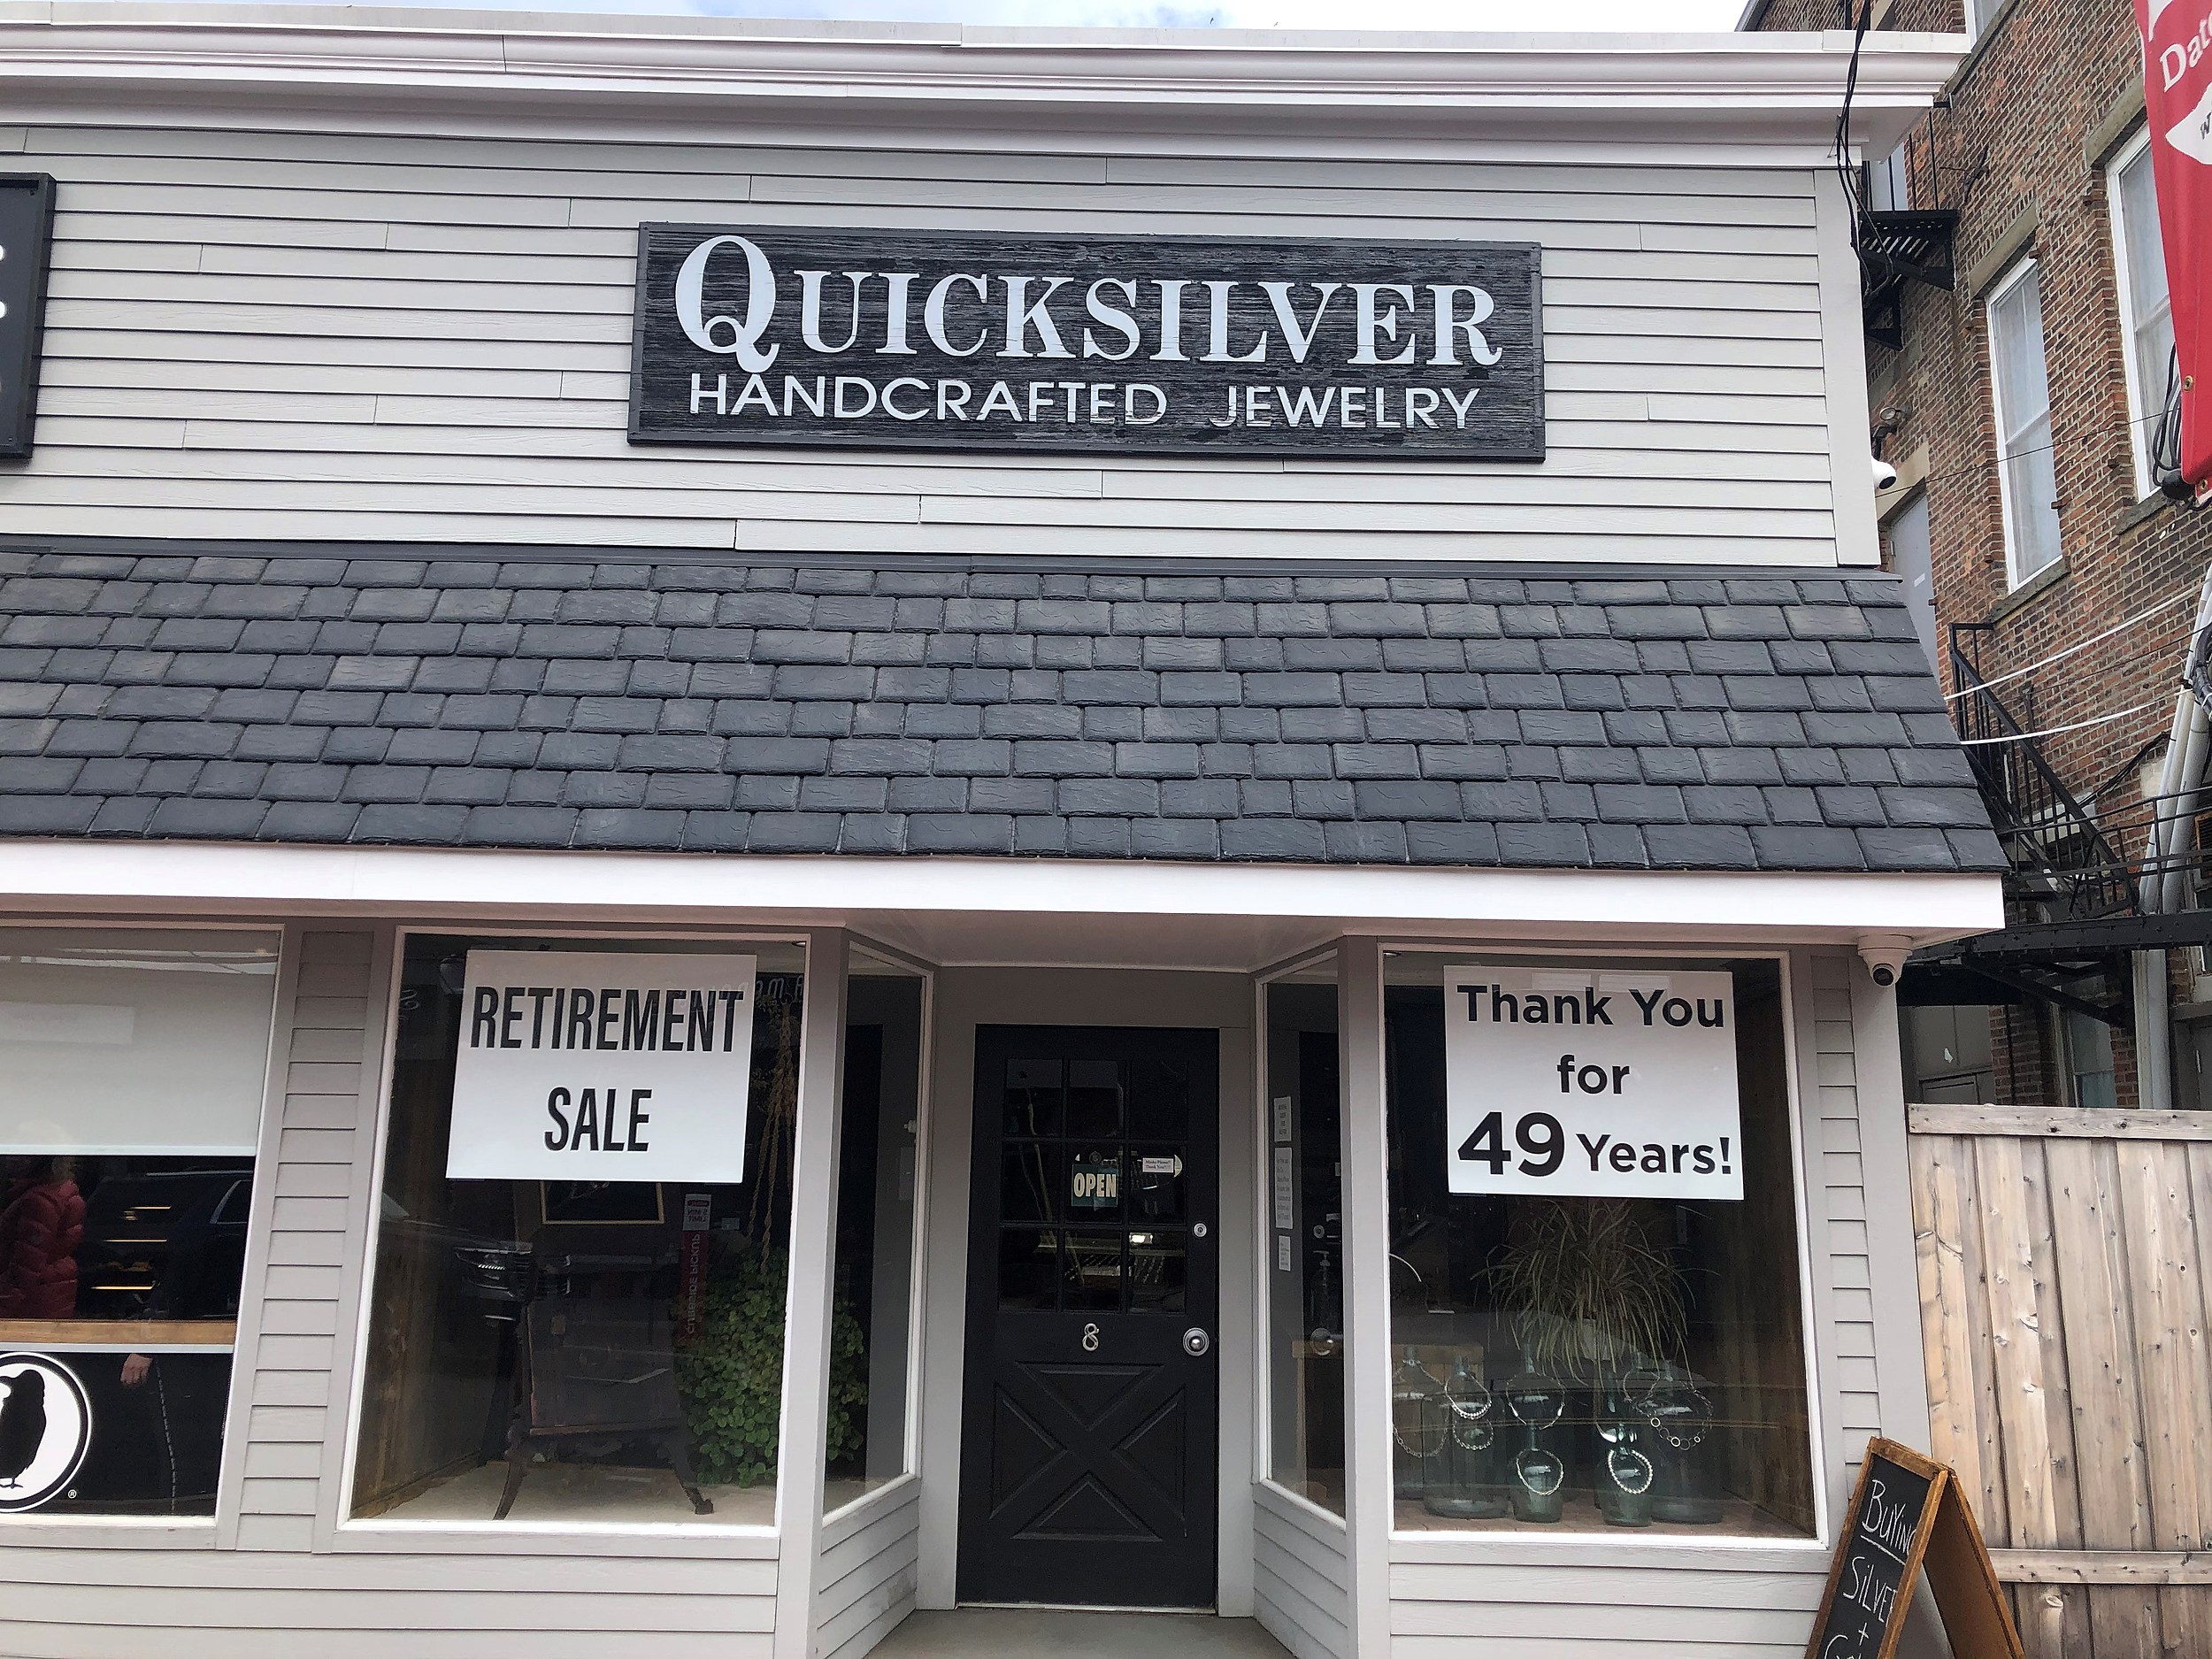 Quicksilver jewelry shop 49 in closing Bank years Red after